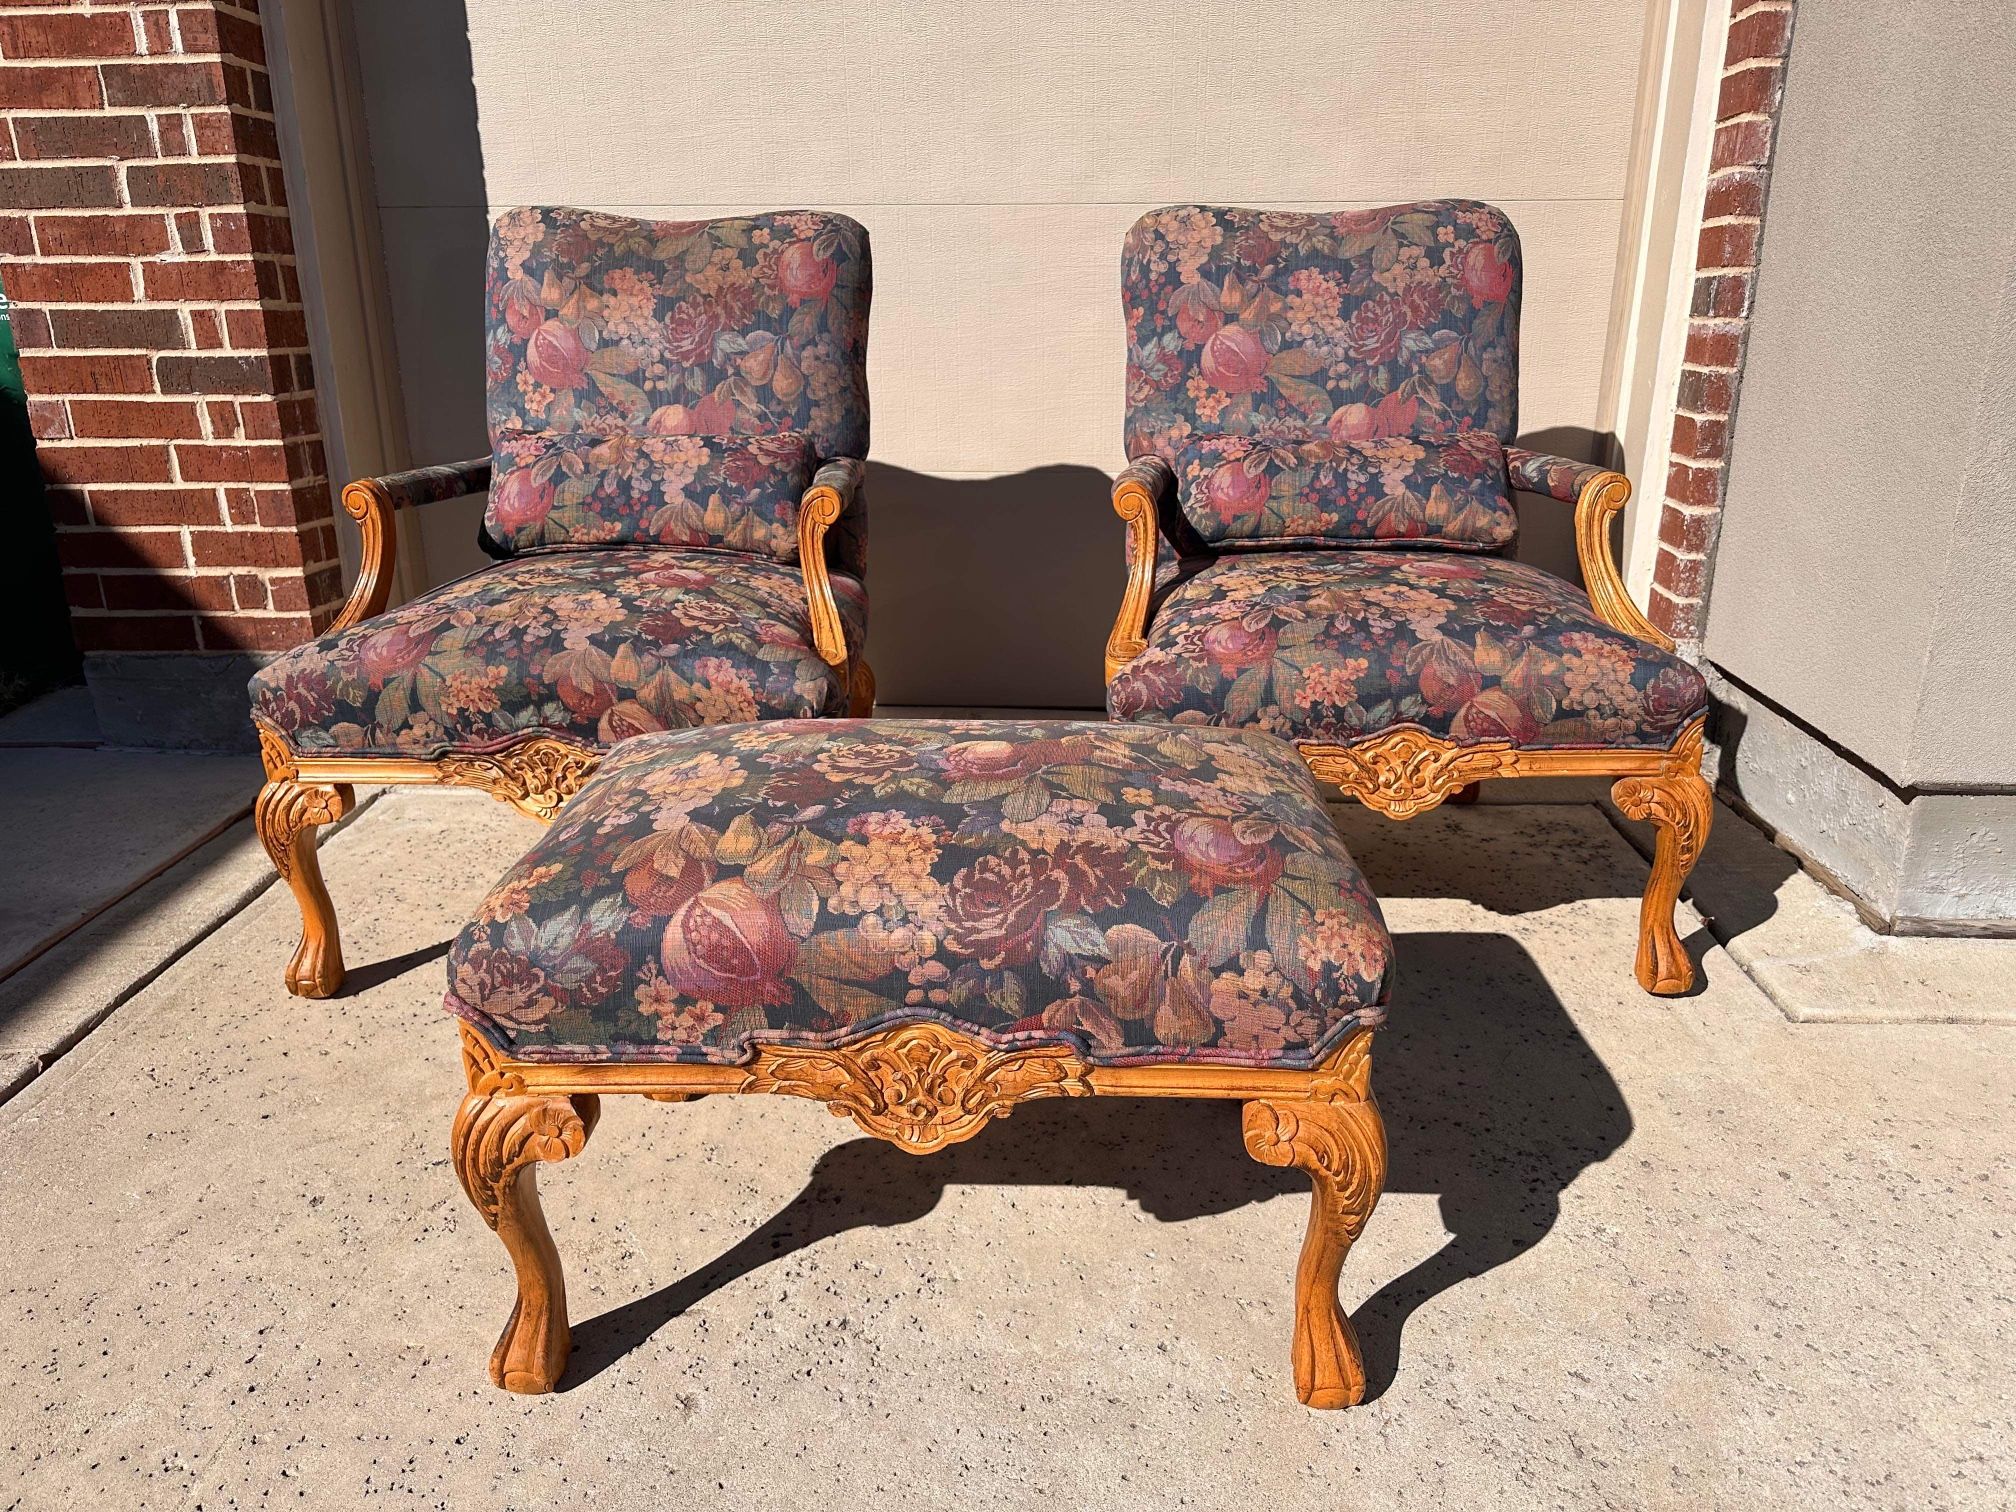 Fruit Floral Patterned Living Room Arm Chairs and One Ottoman